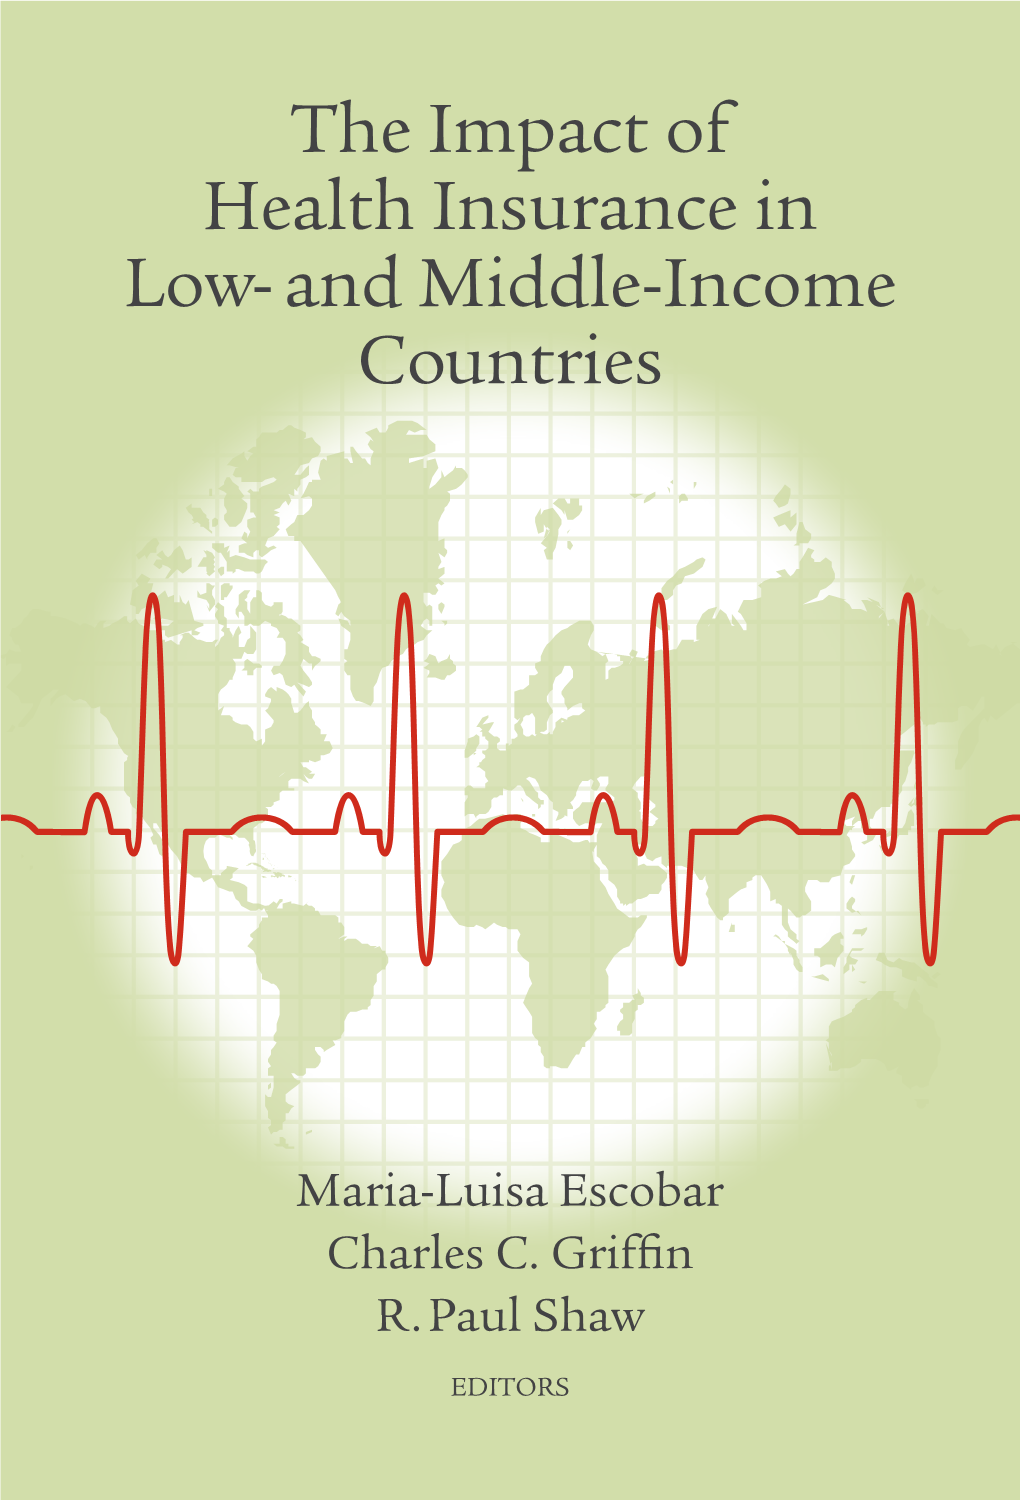 The Impact of Health Insurance in Low- and Middle-Income Countries—On Access, Use, Financial Protection, and Health Status (Box 2.1)